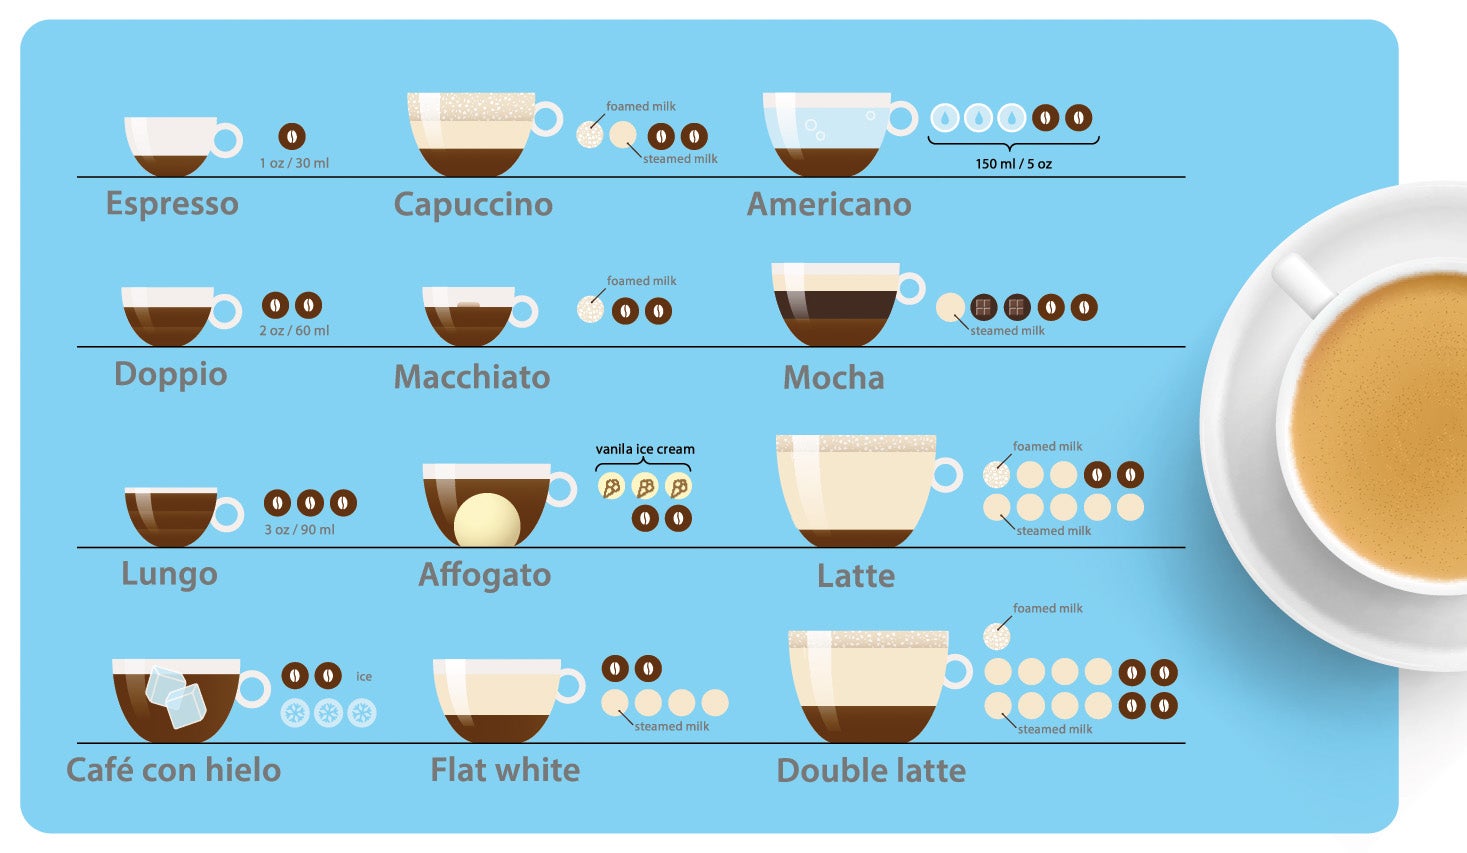 The coffee to milk ratio – as well as foam to steamed milk – is highly specific for most drinks